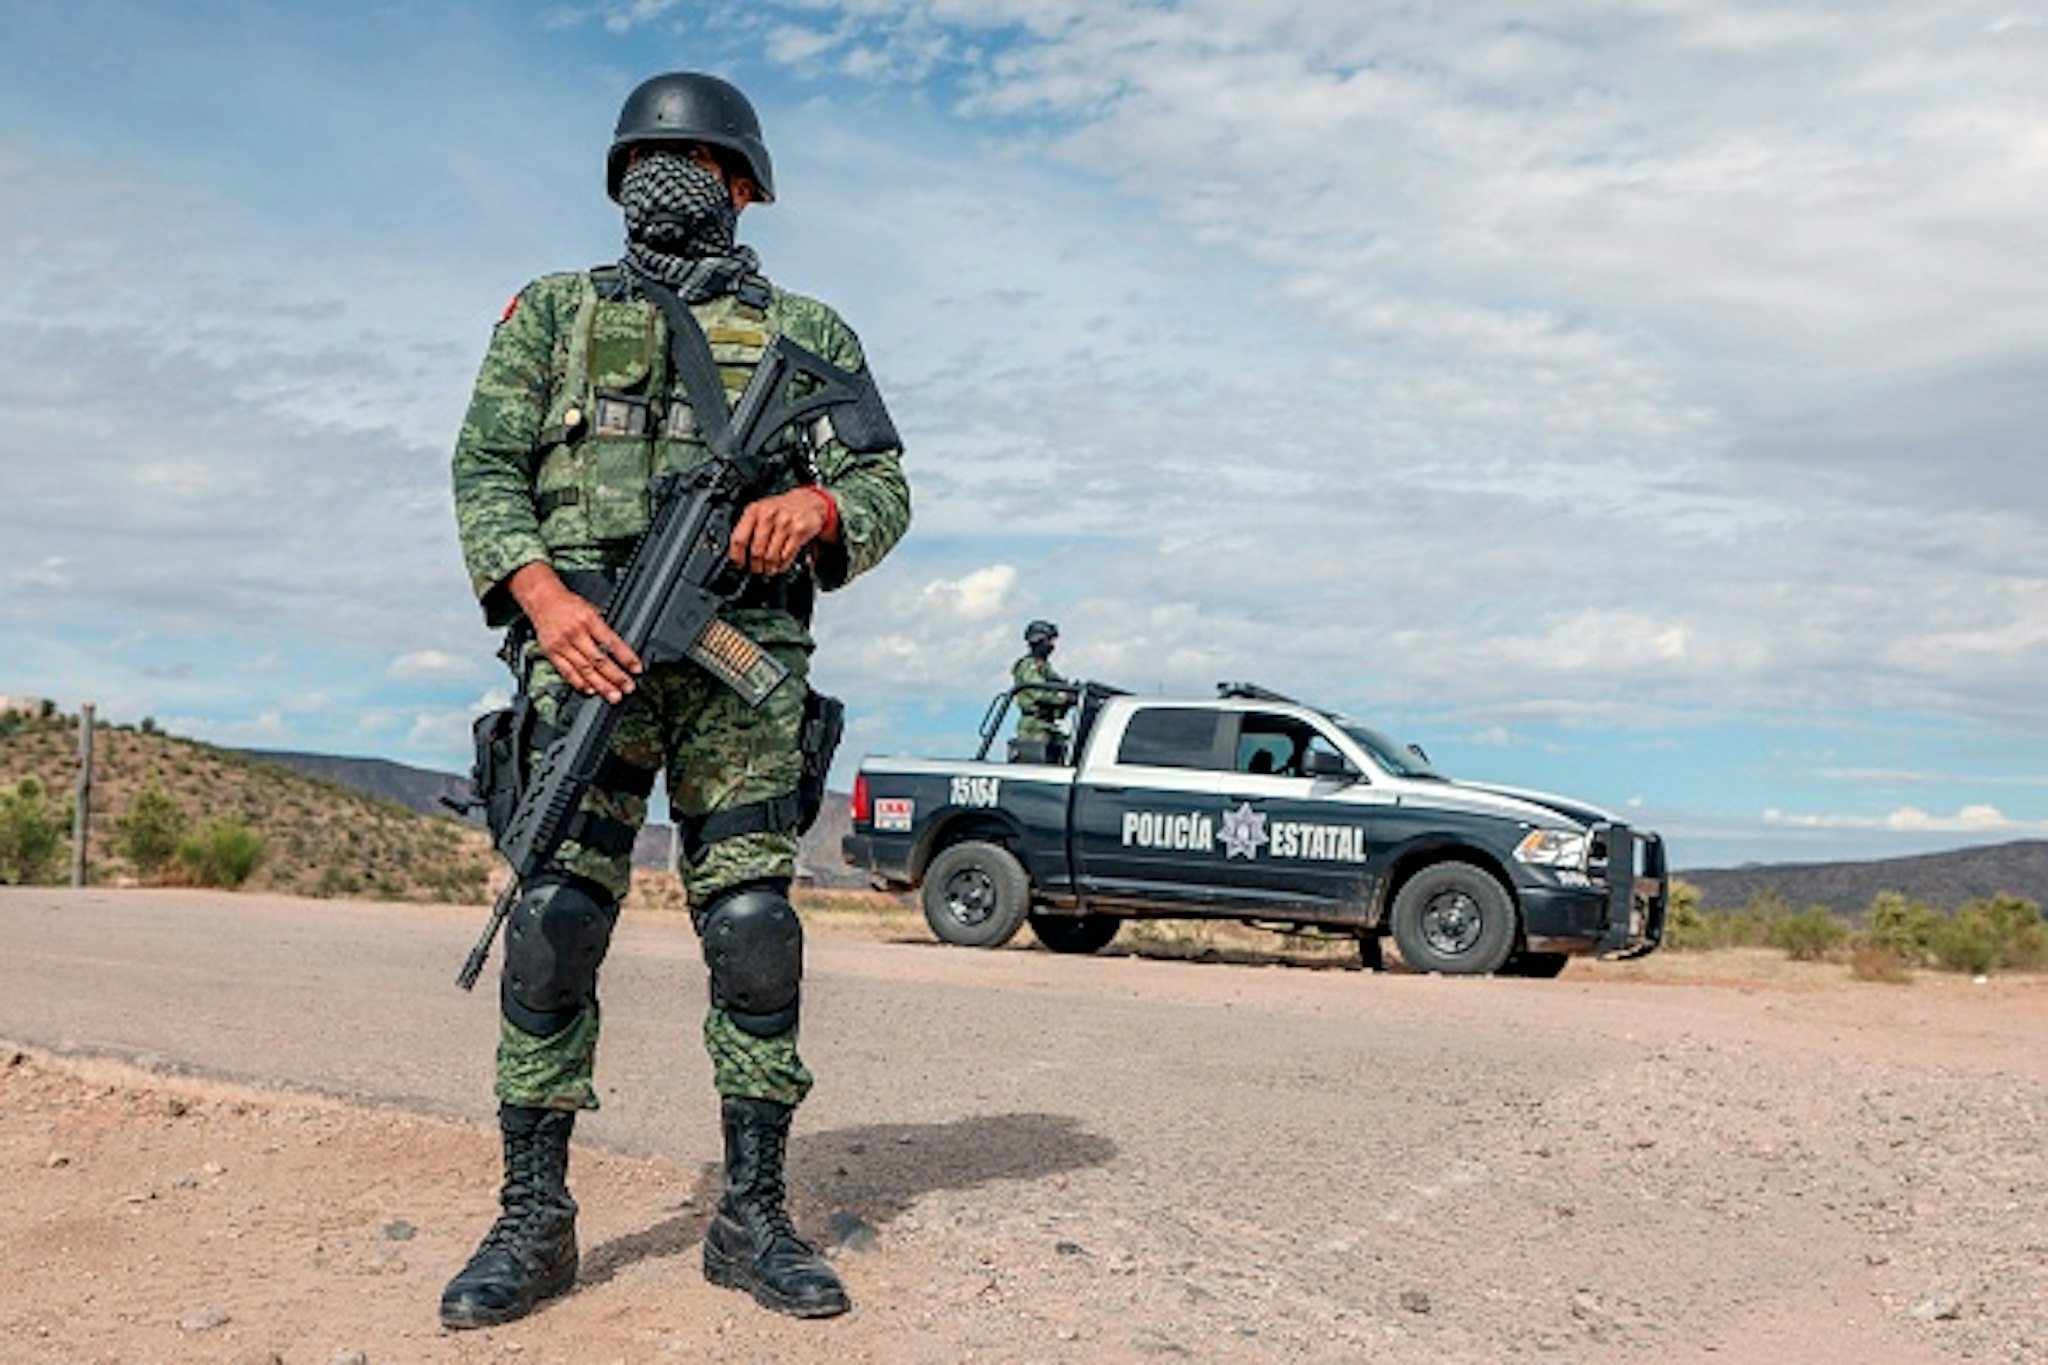 Members of the National Guard stand guard near La Morita ranch, belonging to the Mexican-American LeBaron family -of which nine members were killed in a hail of bullets on November 4- in Bavispe, Sonora state, Mexico, on November 6, 2019. - Mexican authorities said Wednesday they believe a drug cartel called "La Linea" was responsible for the murder of the three women and six children, saying the massacre was committed with American-made ammunition. Eight other children managed to escape, six of them wounded.